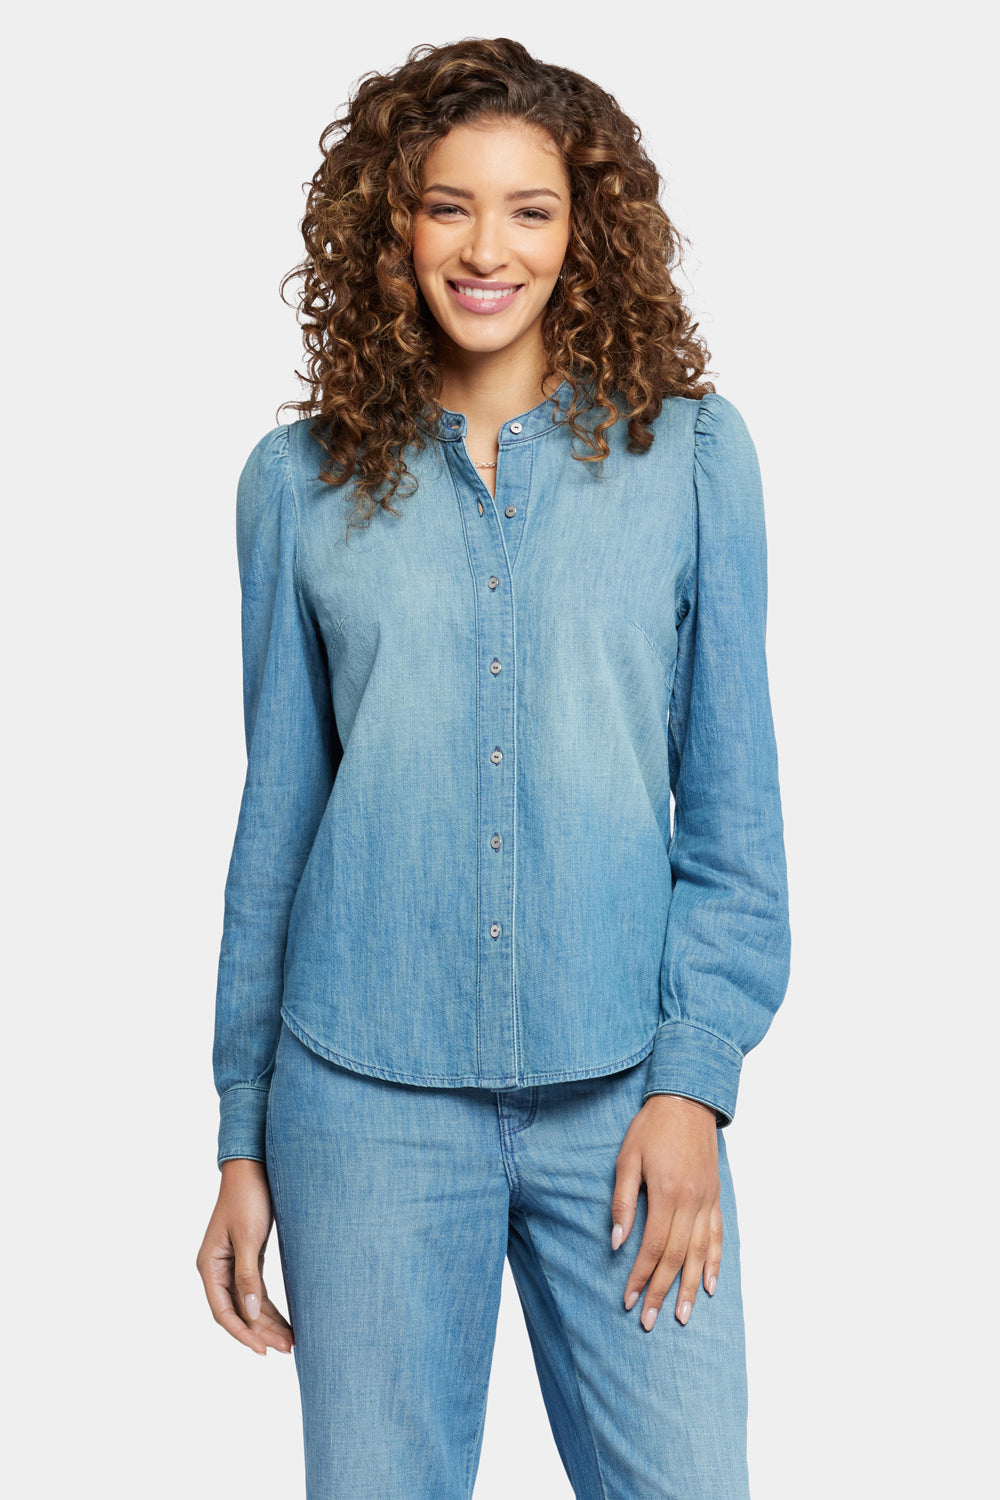 Women's Tops on Sale - T-shirts, Blouses & Knits